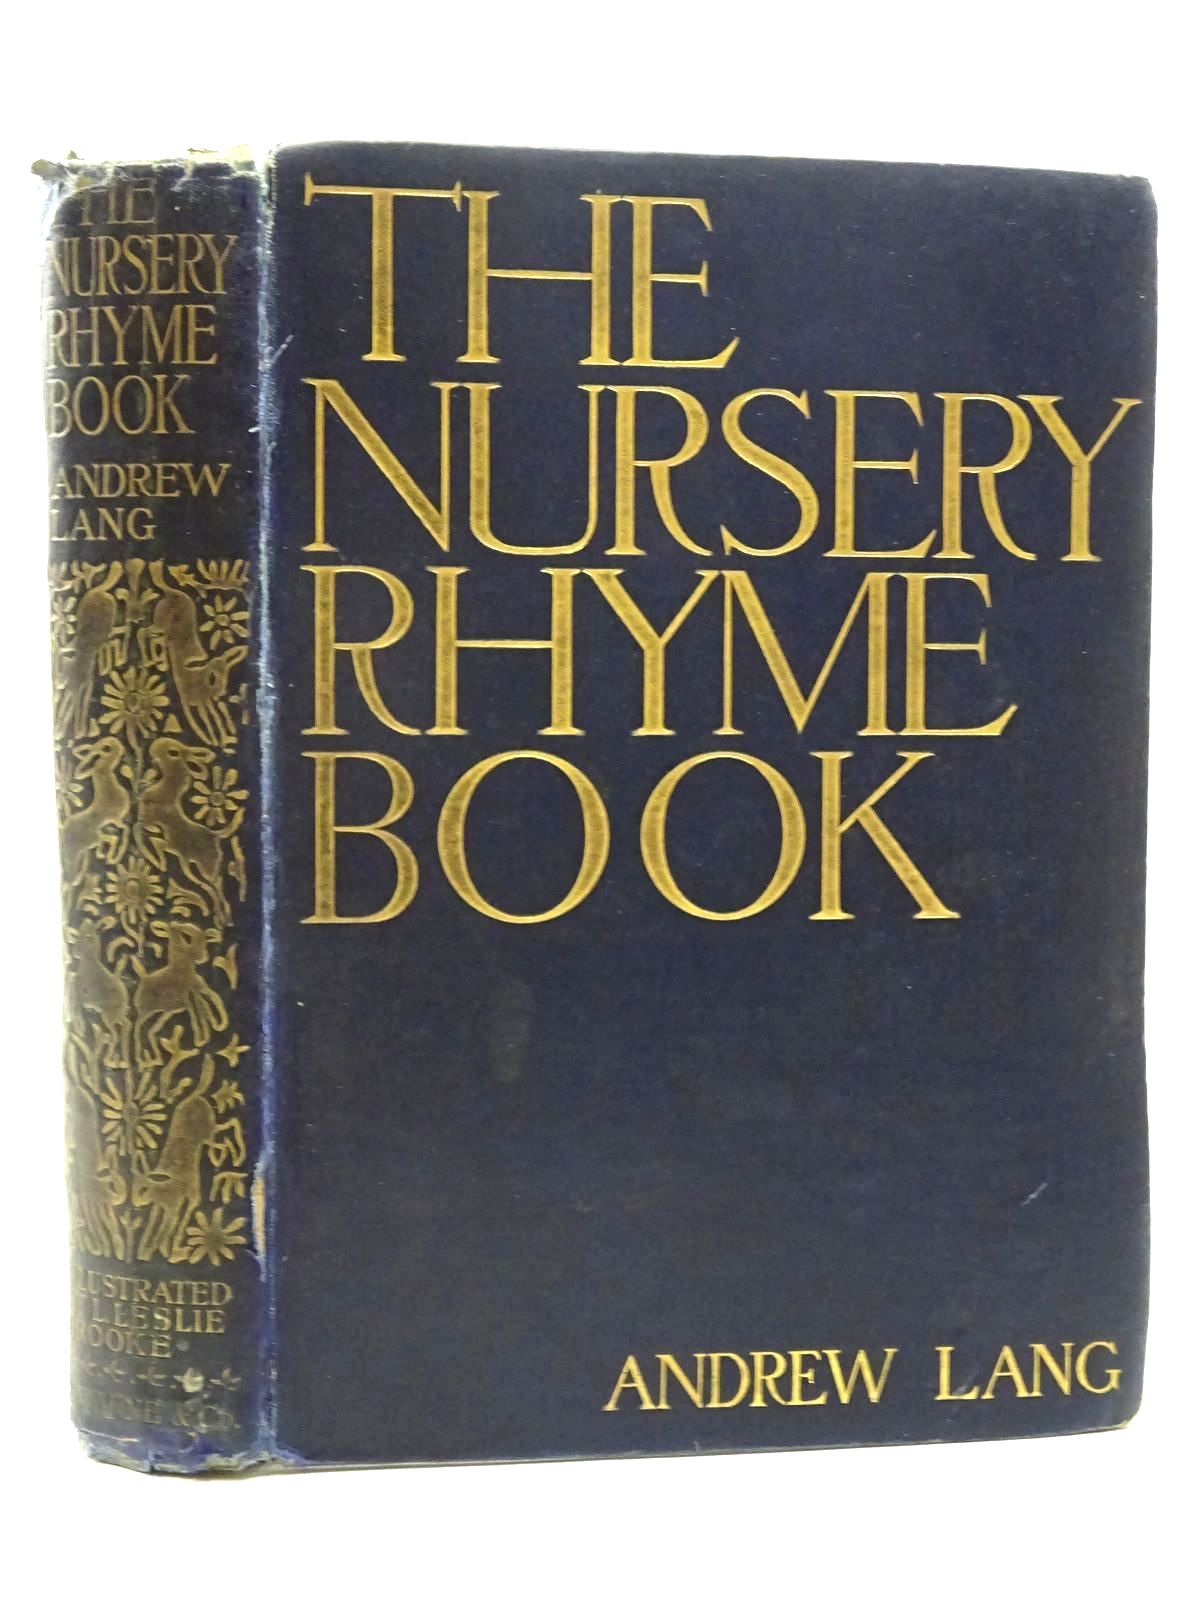 Photo of THE NURSERY RHYME BOOK written by Lang, Andrew illustrated by Brooke, L. Leslie published by Frederick Warne & Co. (STOCK CODE: 2125331)  for sale by Stella & Rose's Books